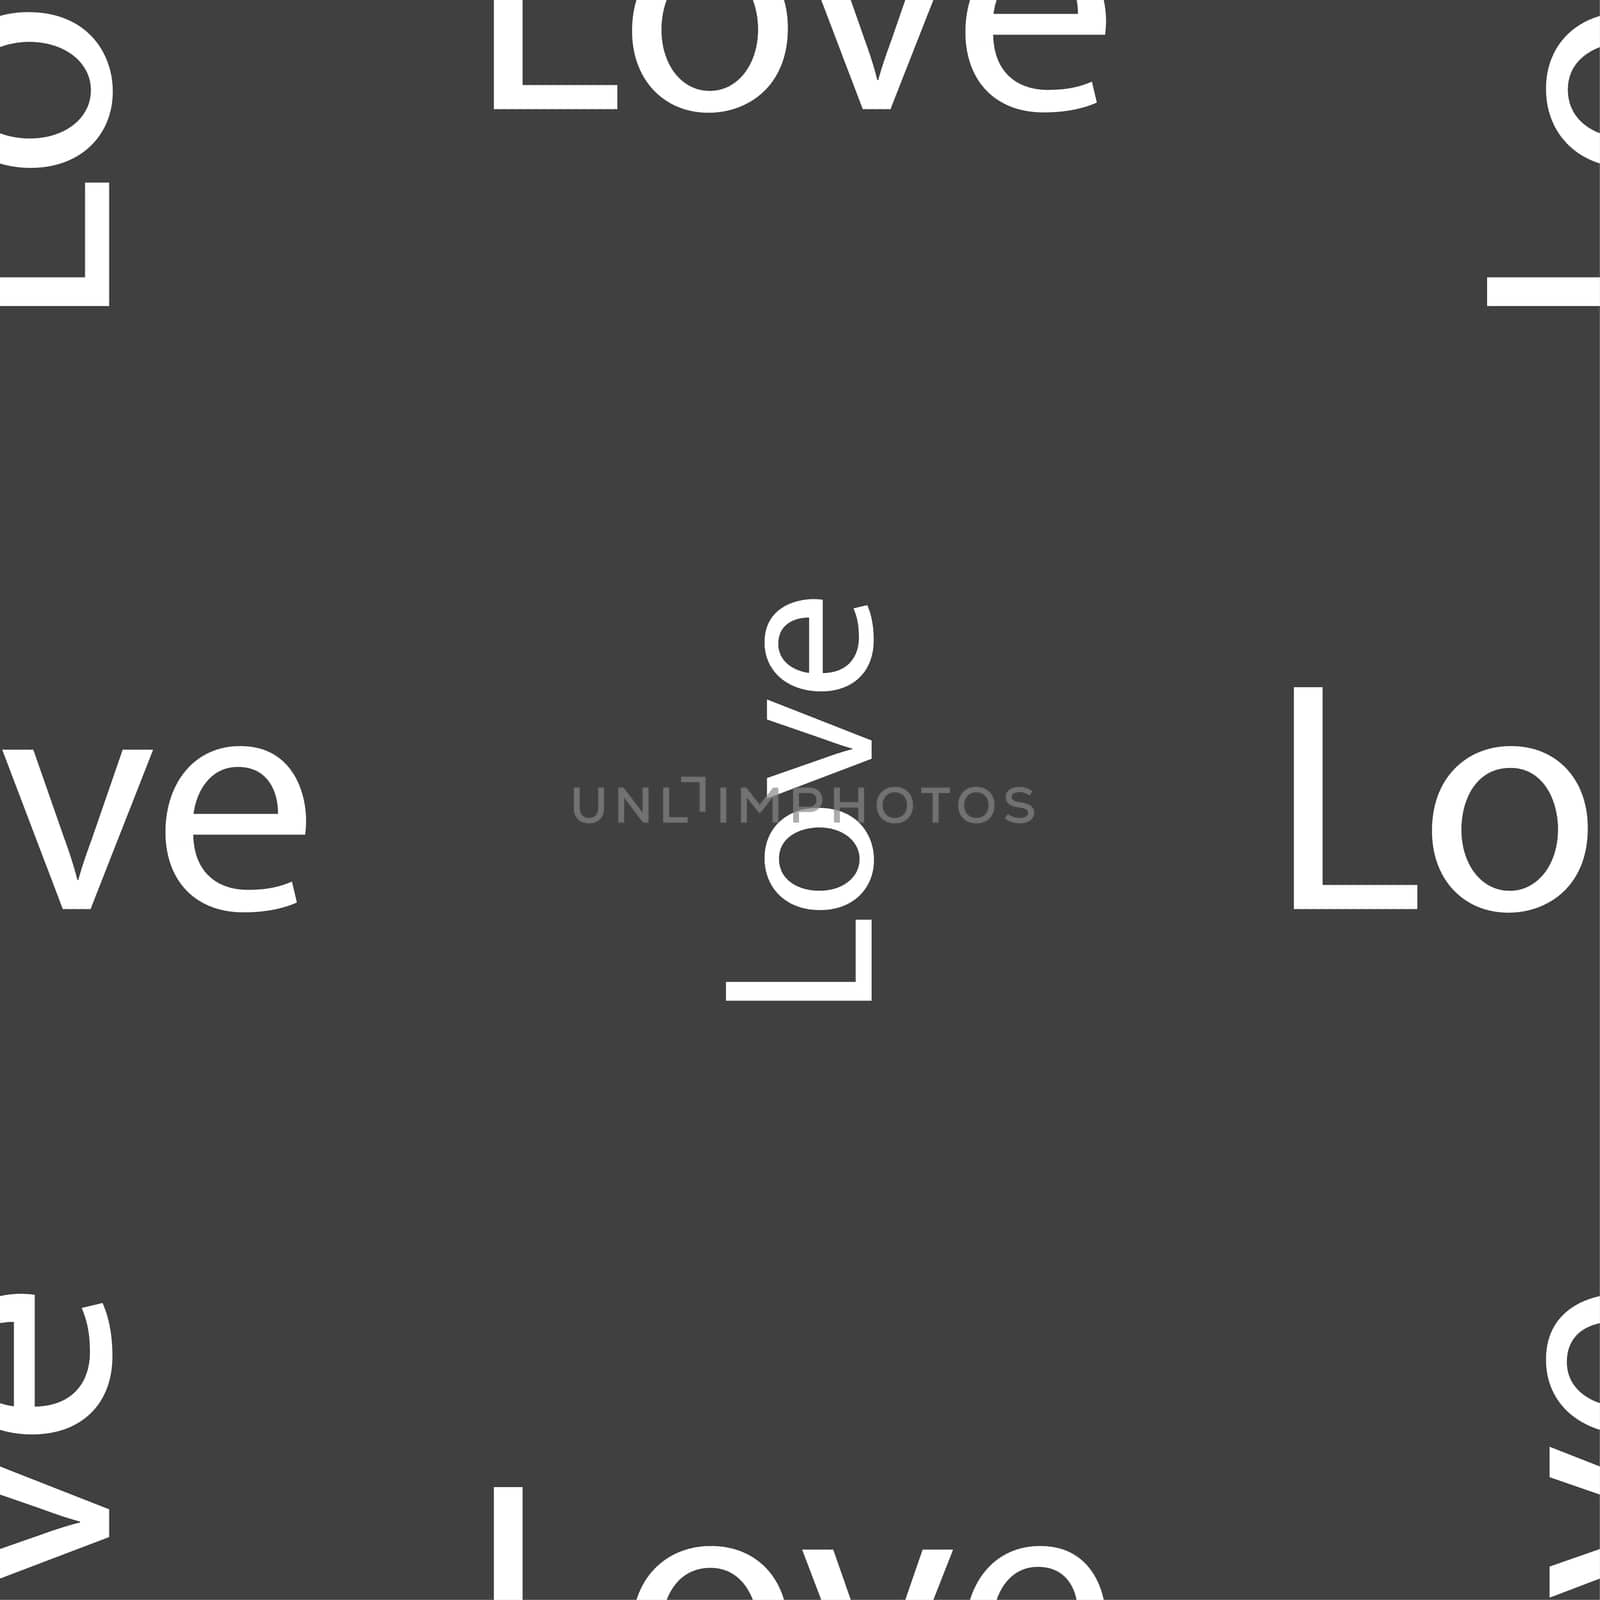 Love you sign icon. Valentines day symbol. Seamless pattern on a gray background. illustration